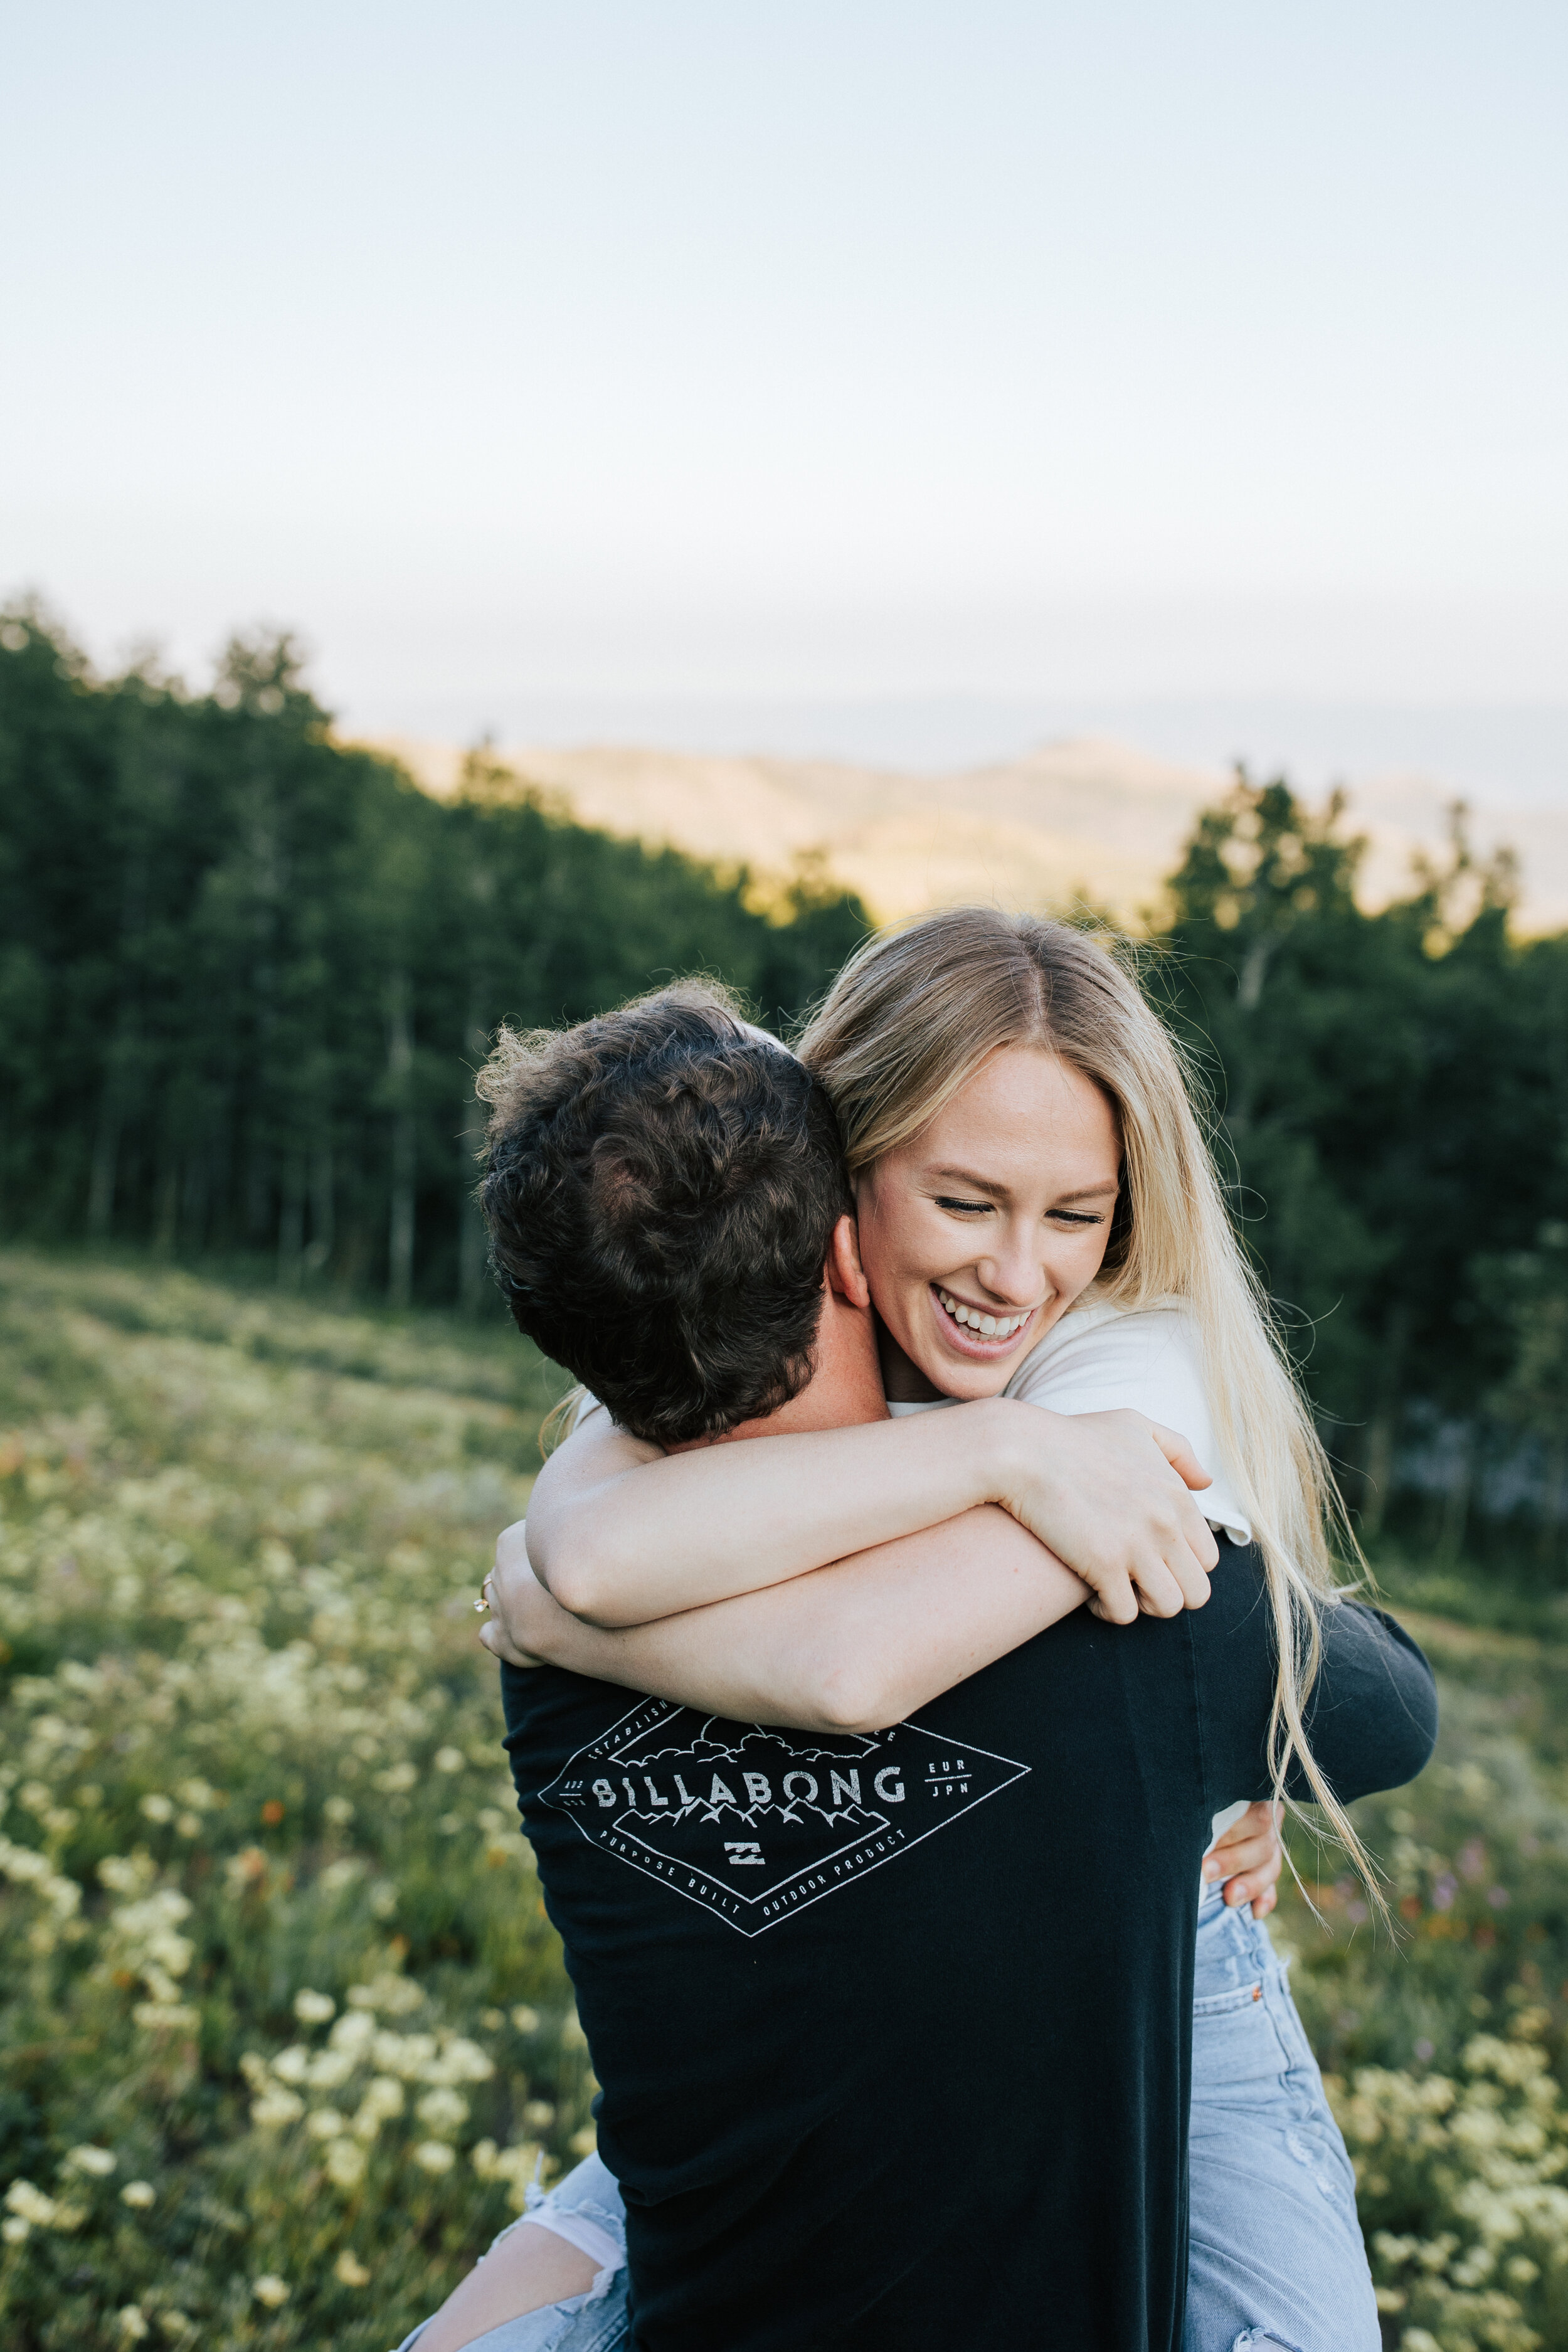  Engagement session in wildflowers in the mountains near Park City, Utah. Summertime engagement photos with mountain views. Engaged couple hug in the mountains. Outfit inspo. Engagement outfits. #engagementphotos #engagements #weddingphotographer #ph